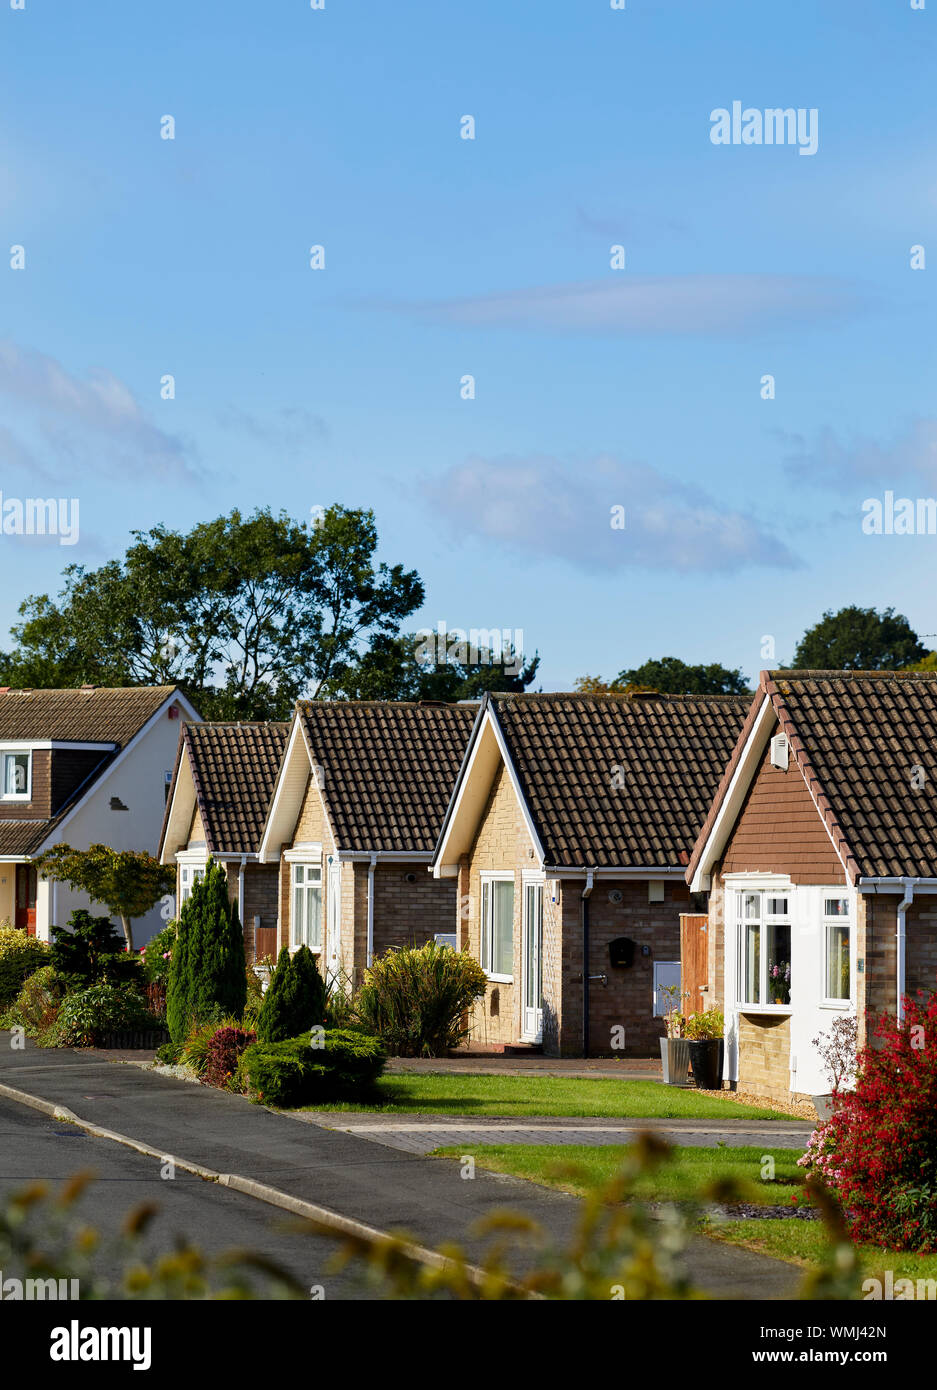 Row of Bungalows in a street Stock Photo